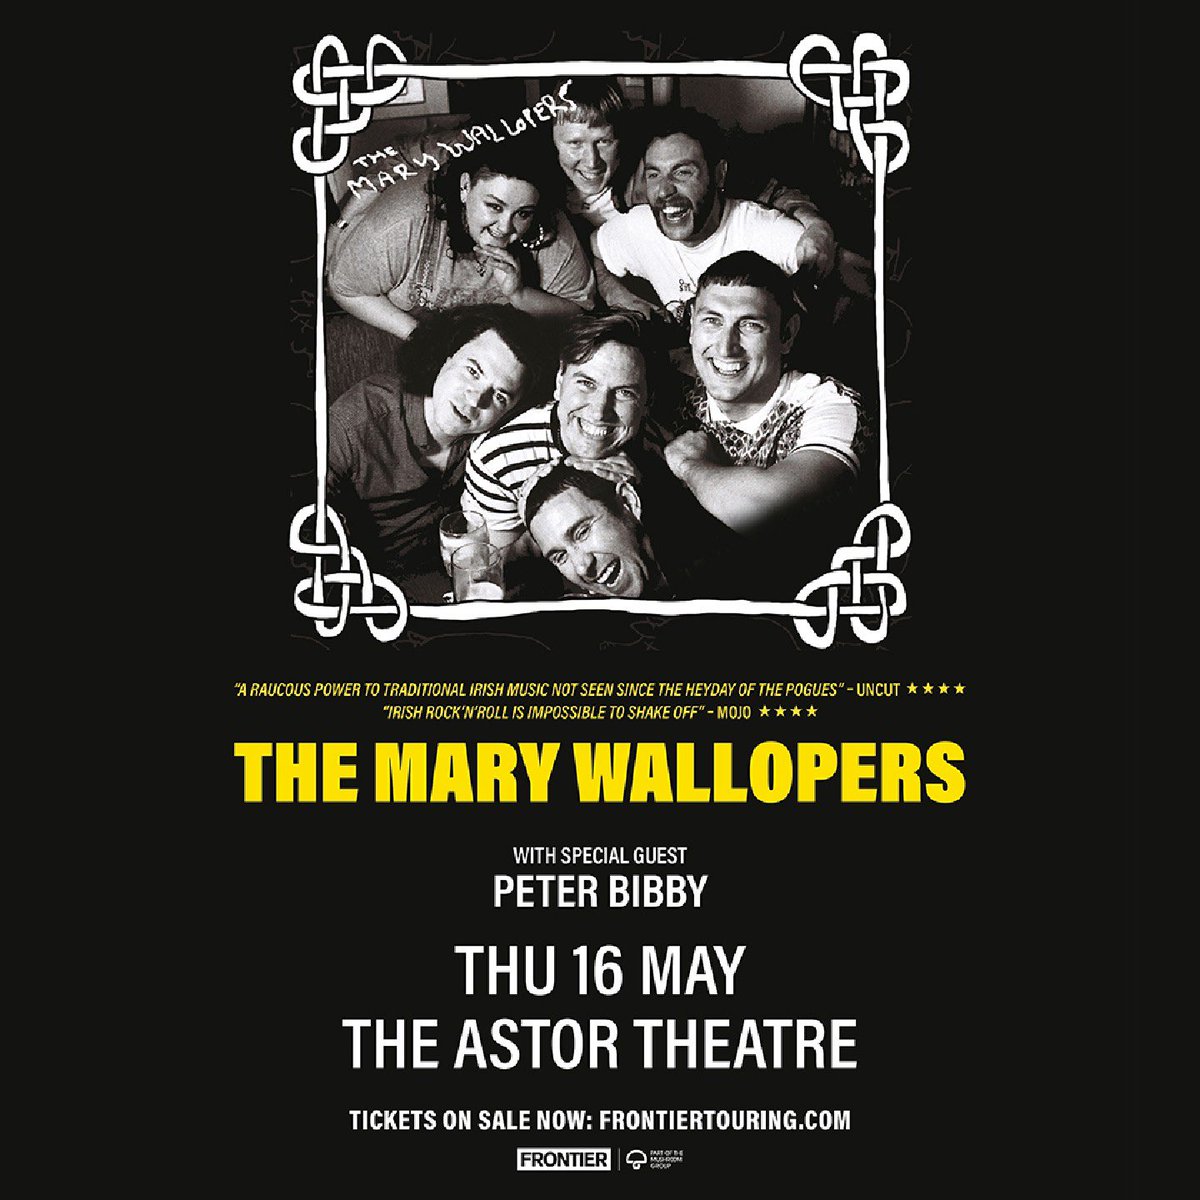 In lieu of a residency show at the Buffalo Club tonight, Peter Bibby will be opening for the @marywallopers at @astortheatre in Perth! 

Still a few tickets left at the door🚪 
Doors open at 7:30pm and Peter is on at 8 ⏰